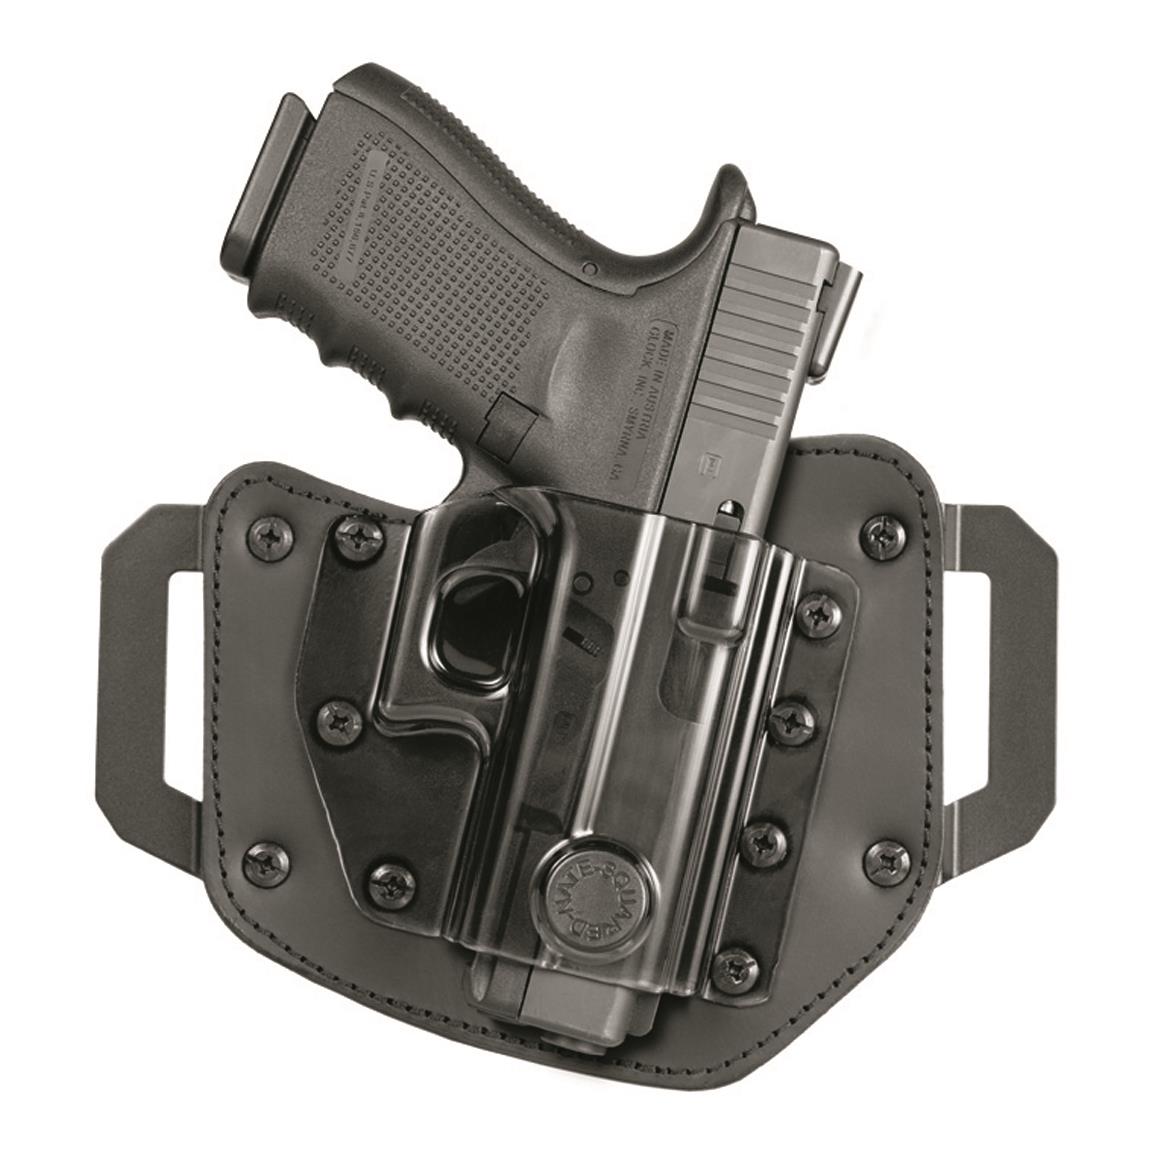 N8 Tactical Pro-Lock OWB Holster, S&W M&P9 Shield, Right Hand